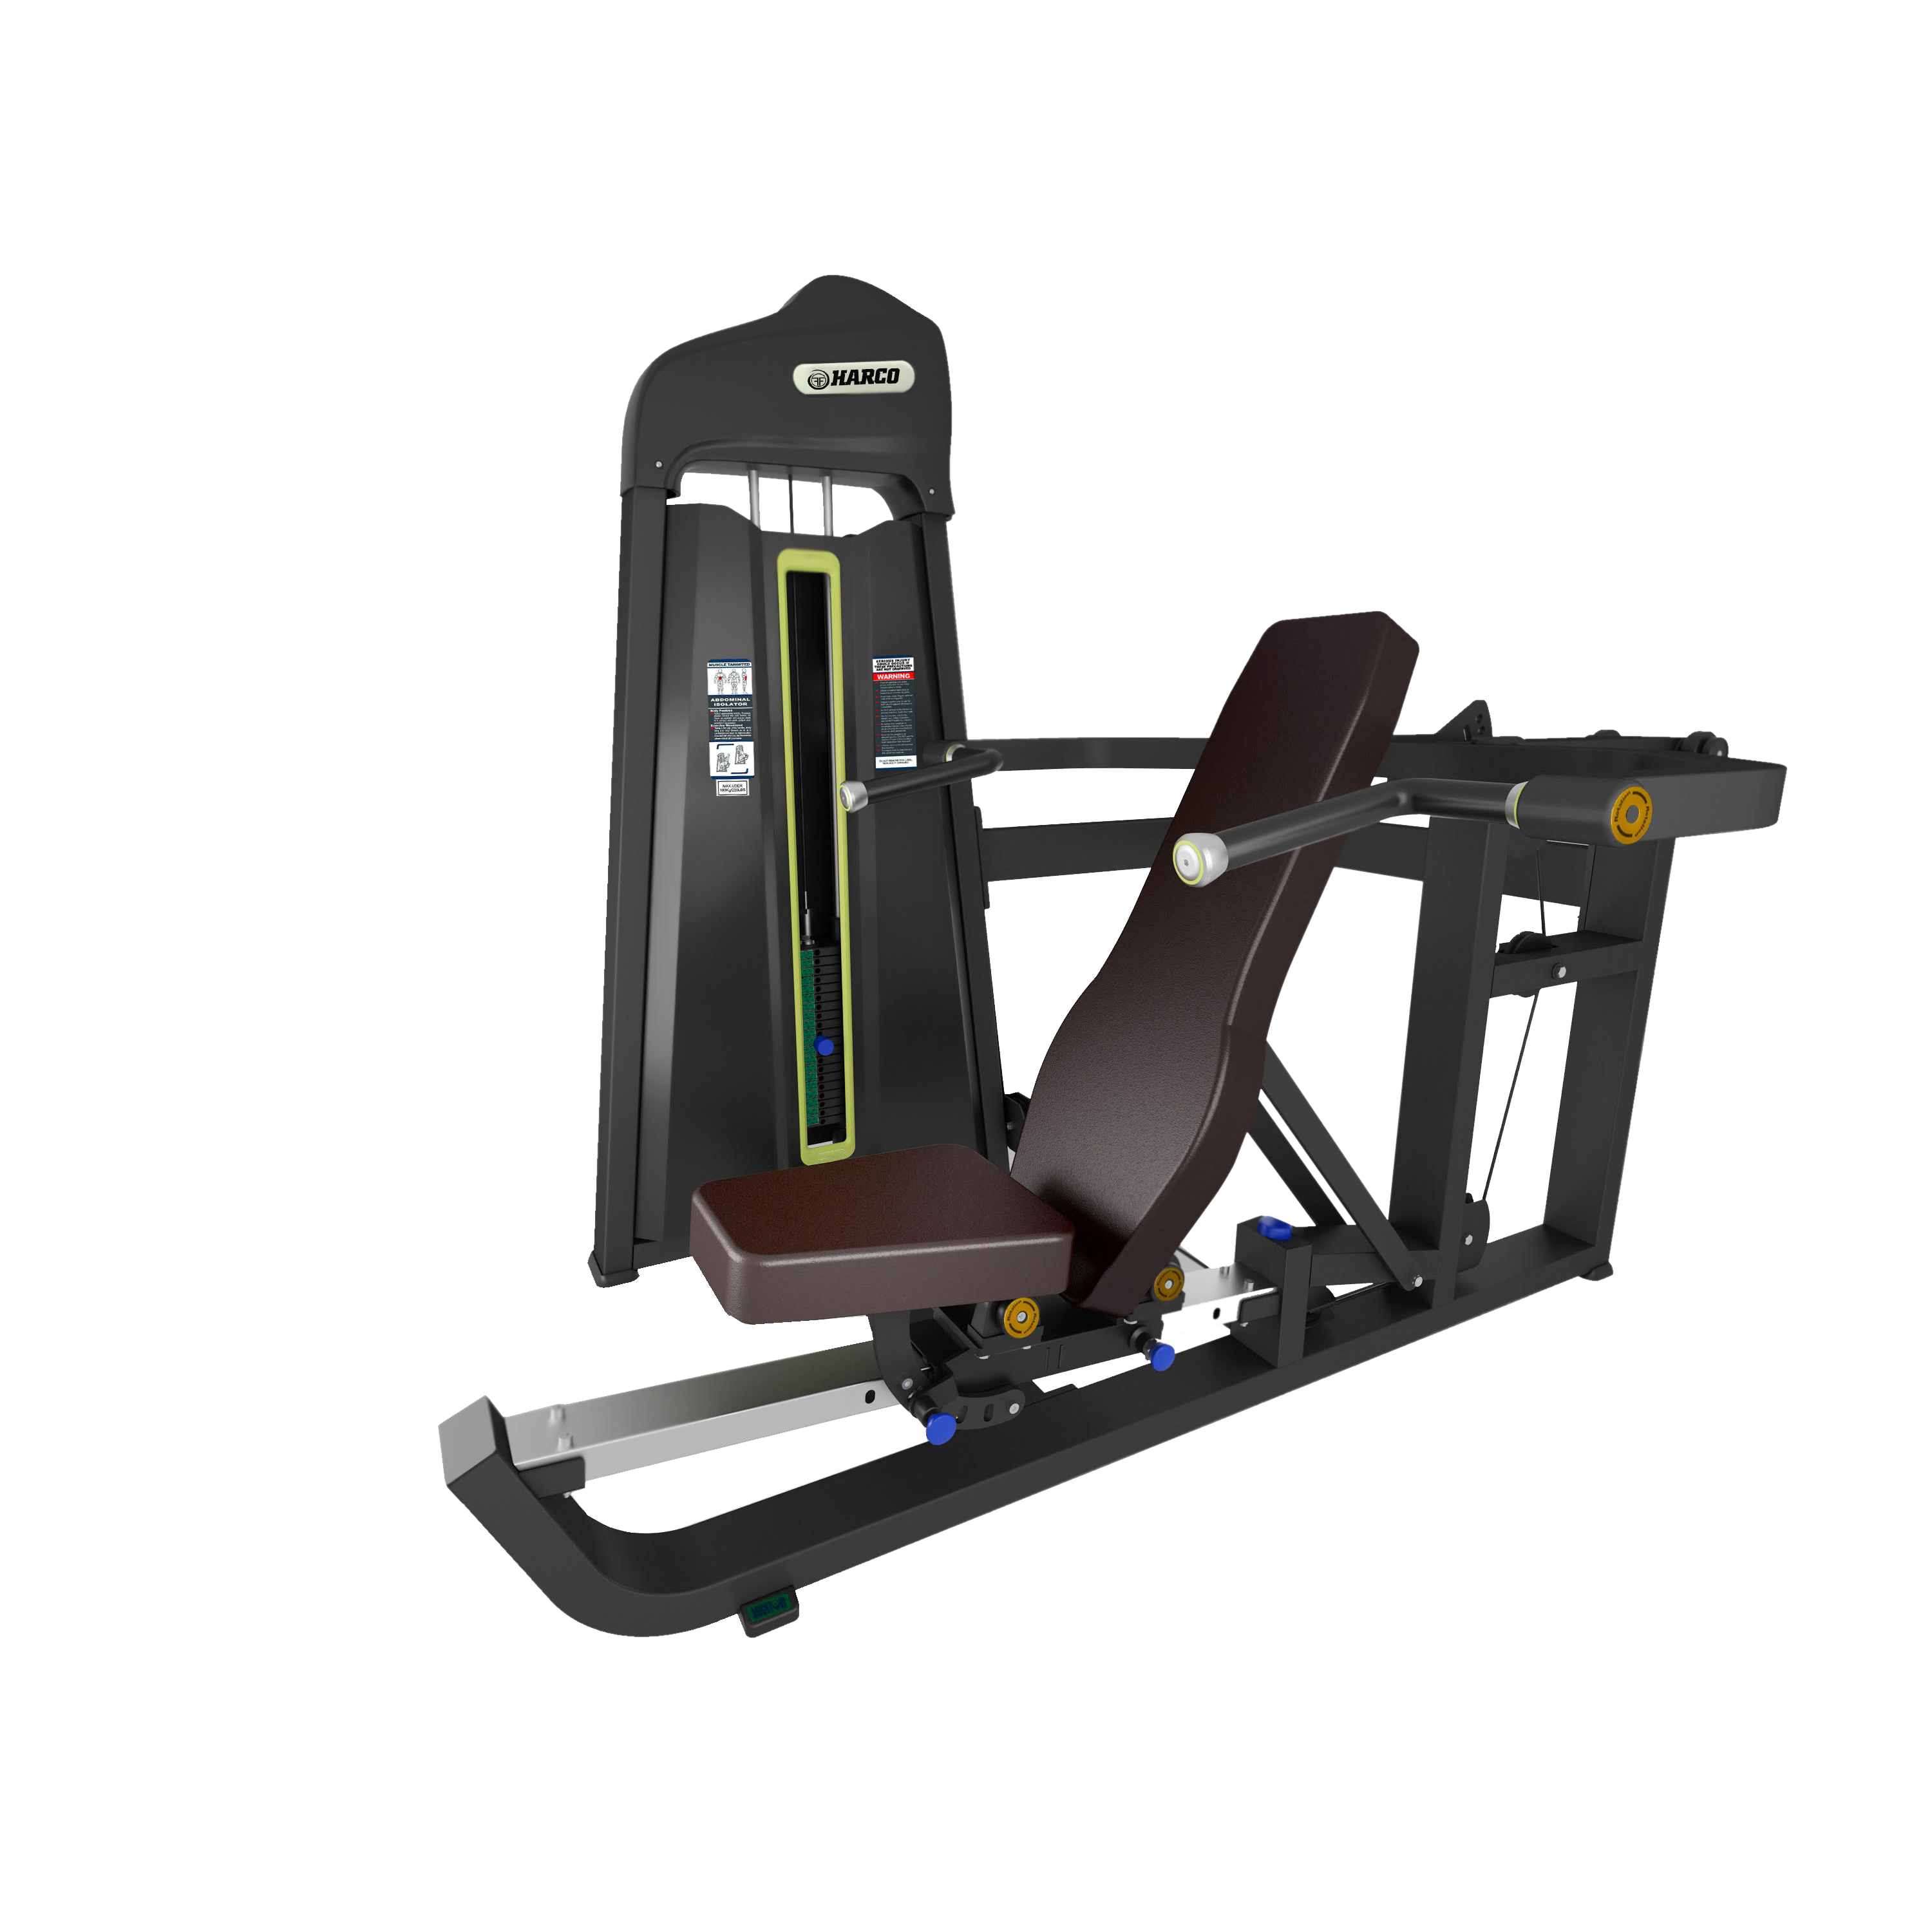 SRTB-12 SHOULDER PRESS- SEATED CHEST PRESS – Harco India